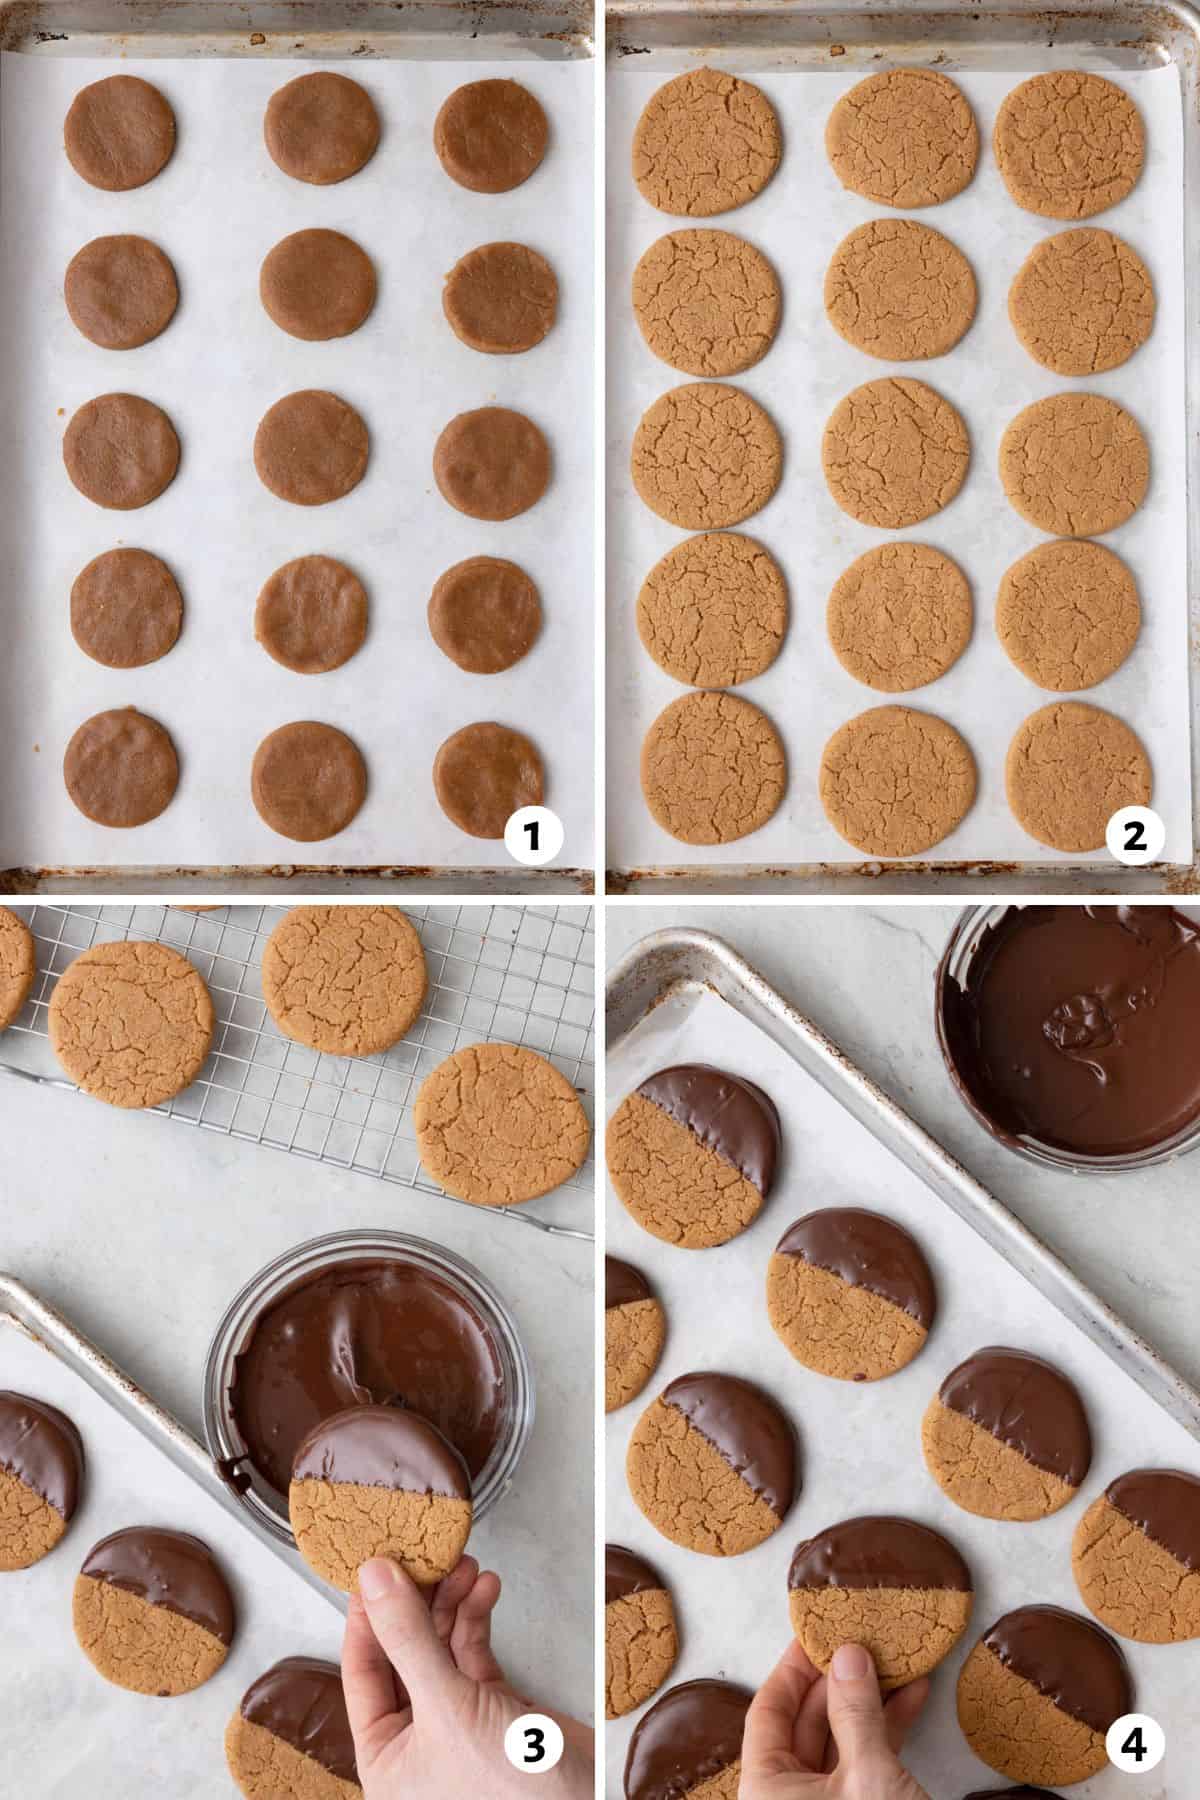 4 image collage of cookies on baking sheet before and after baked, then dipping into melted chooclate, and placng it on parchment paper line baking sheet with other dipped cookies on it.